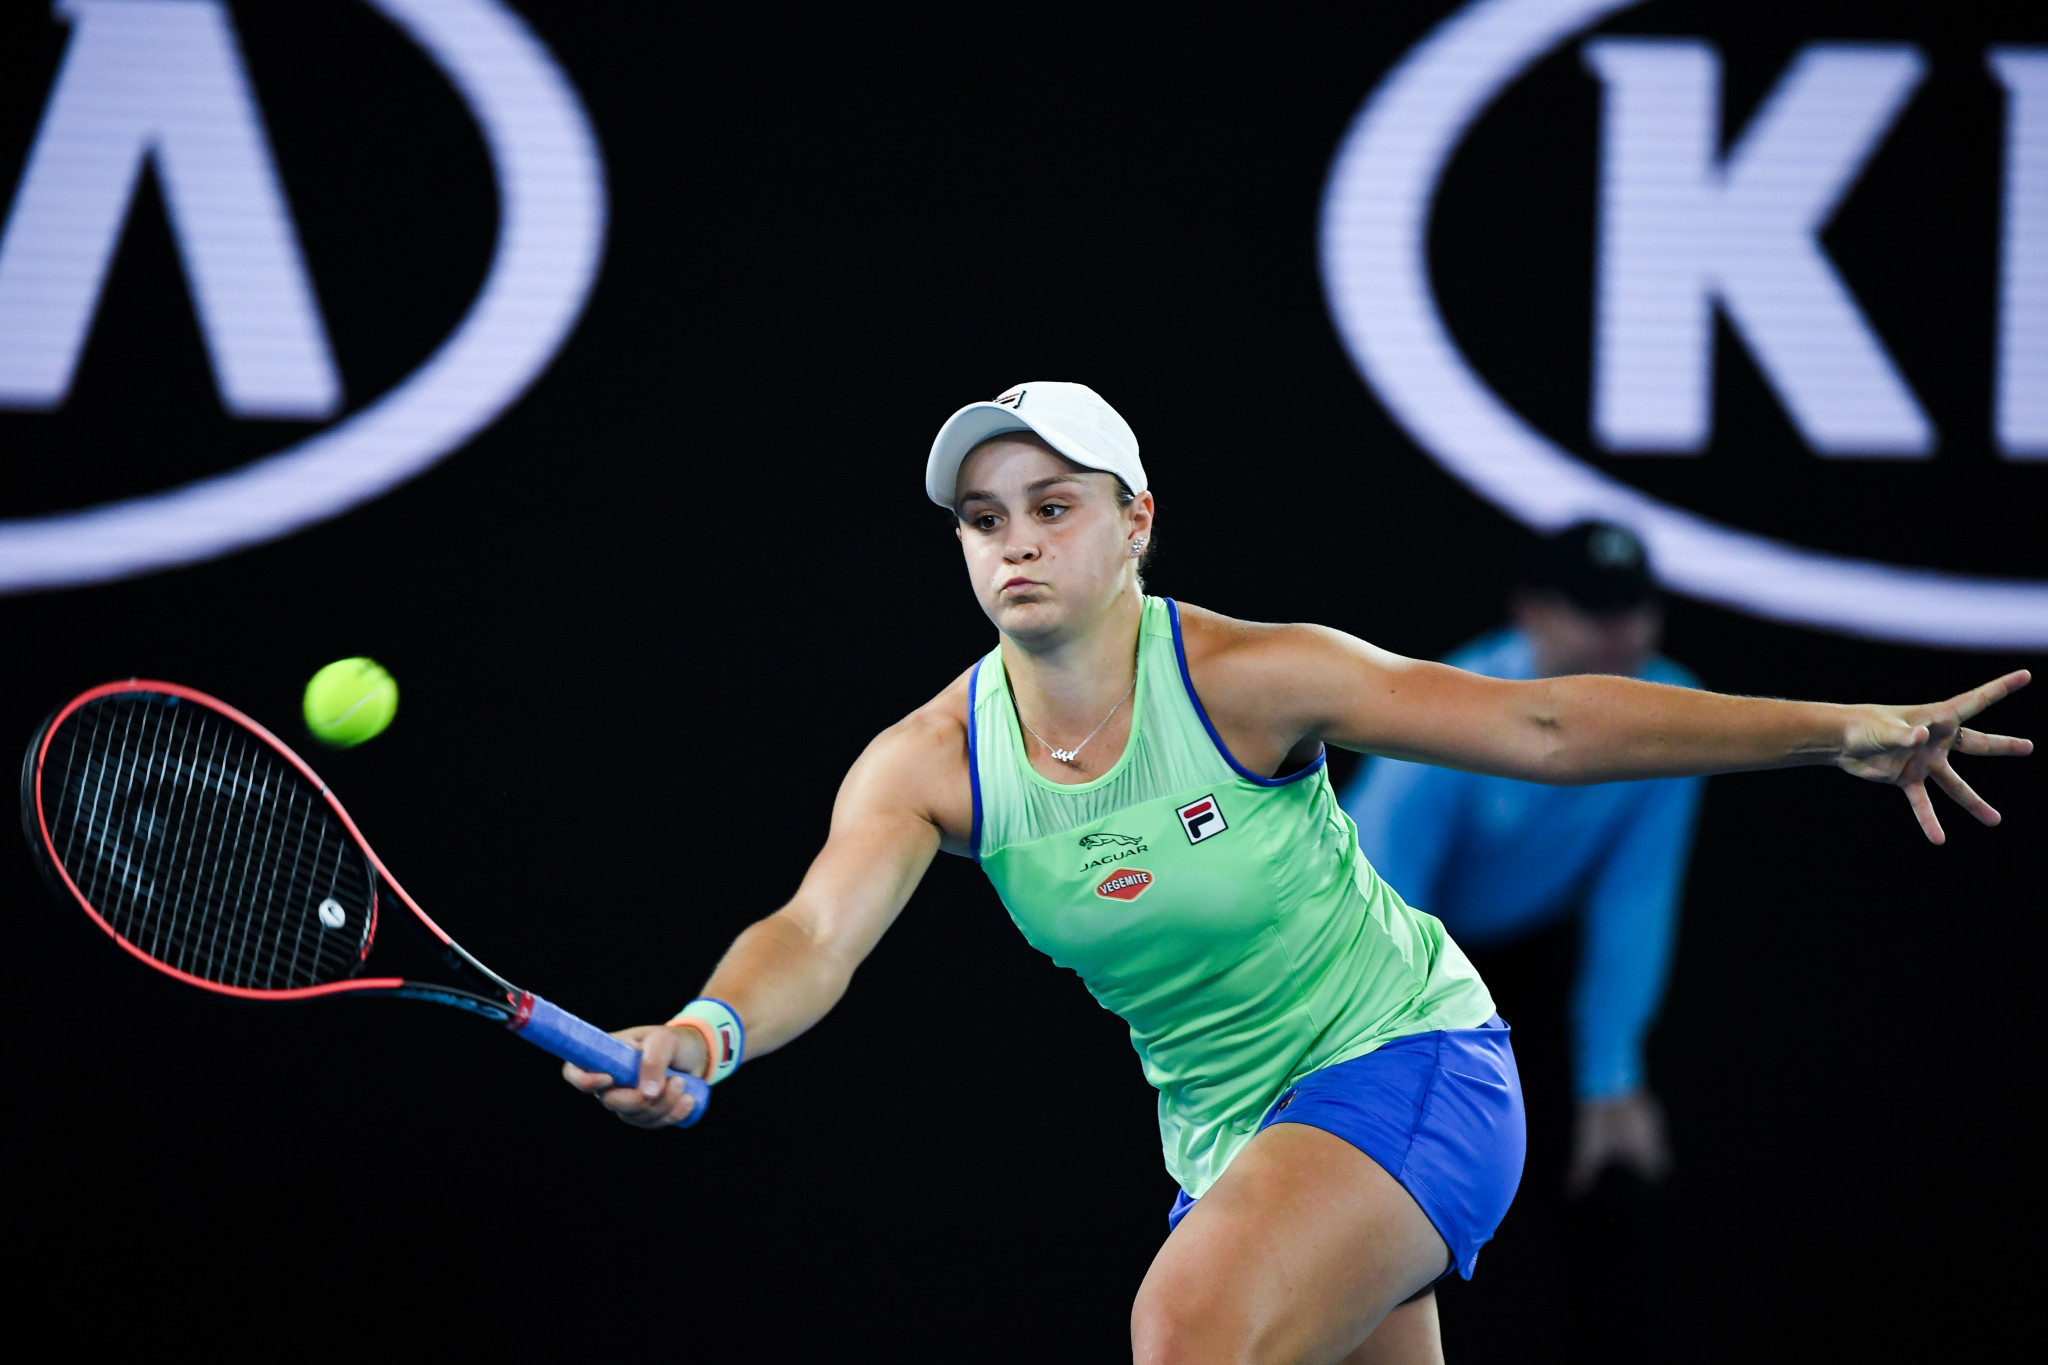 Barty recovers from slow start to progress at Australian Open